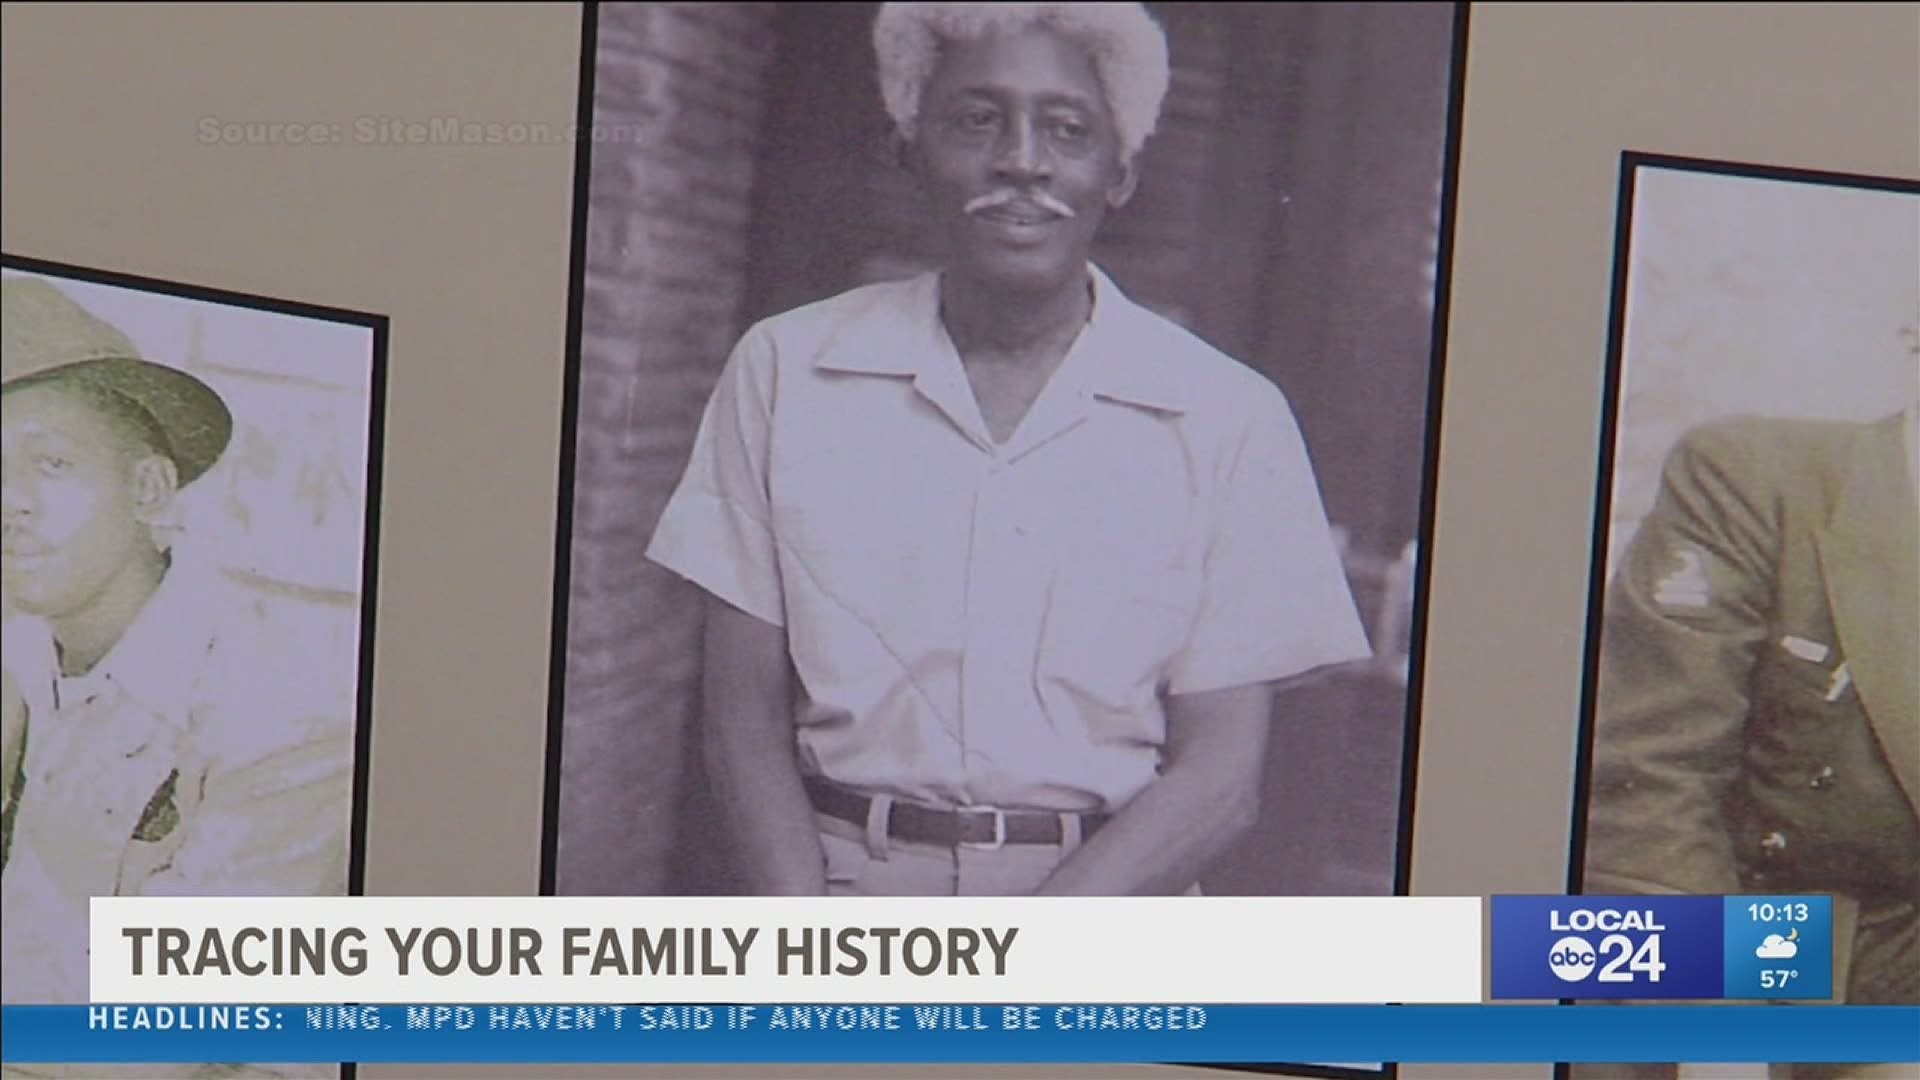 Slavery and lack of documents have kept many Black Americans from knowing their family’s full story. But the Black Genealogy movement is working to change that.